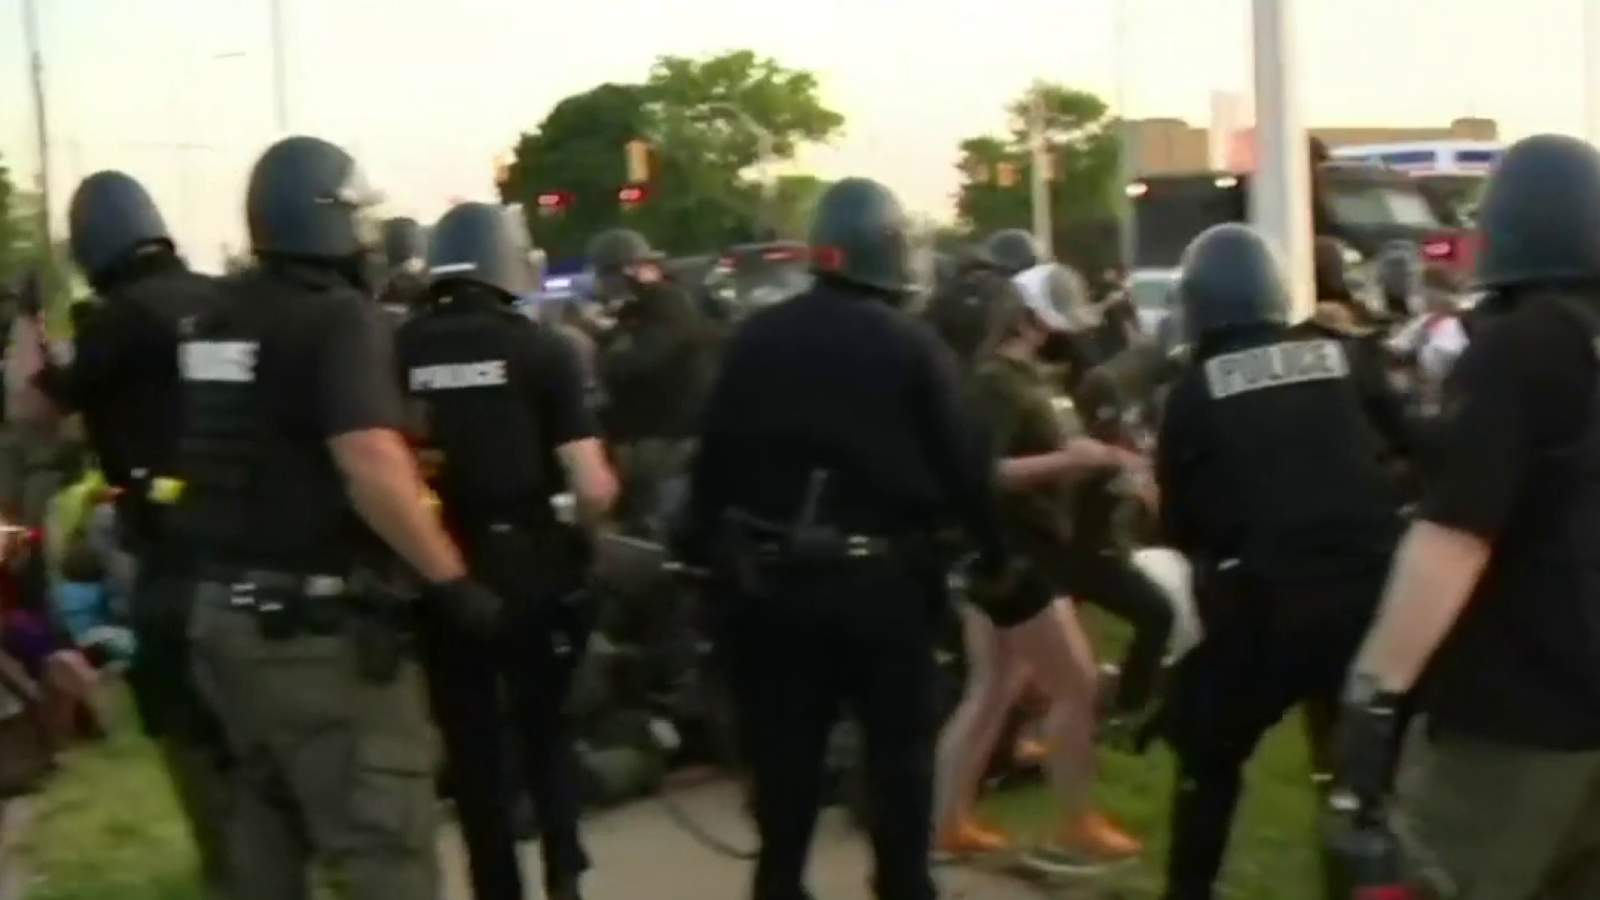 Go home: Detroit police chief, community leaders slam violent out-of-town protesters